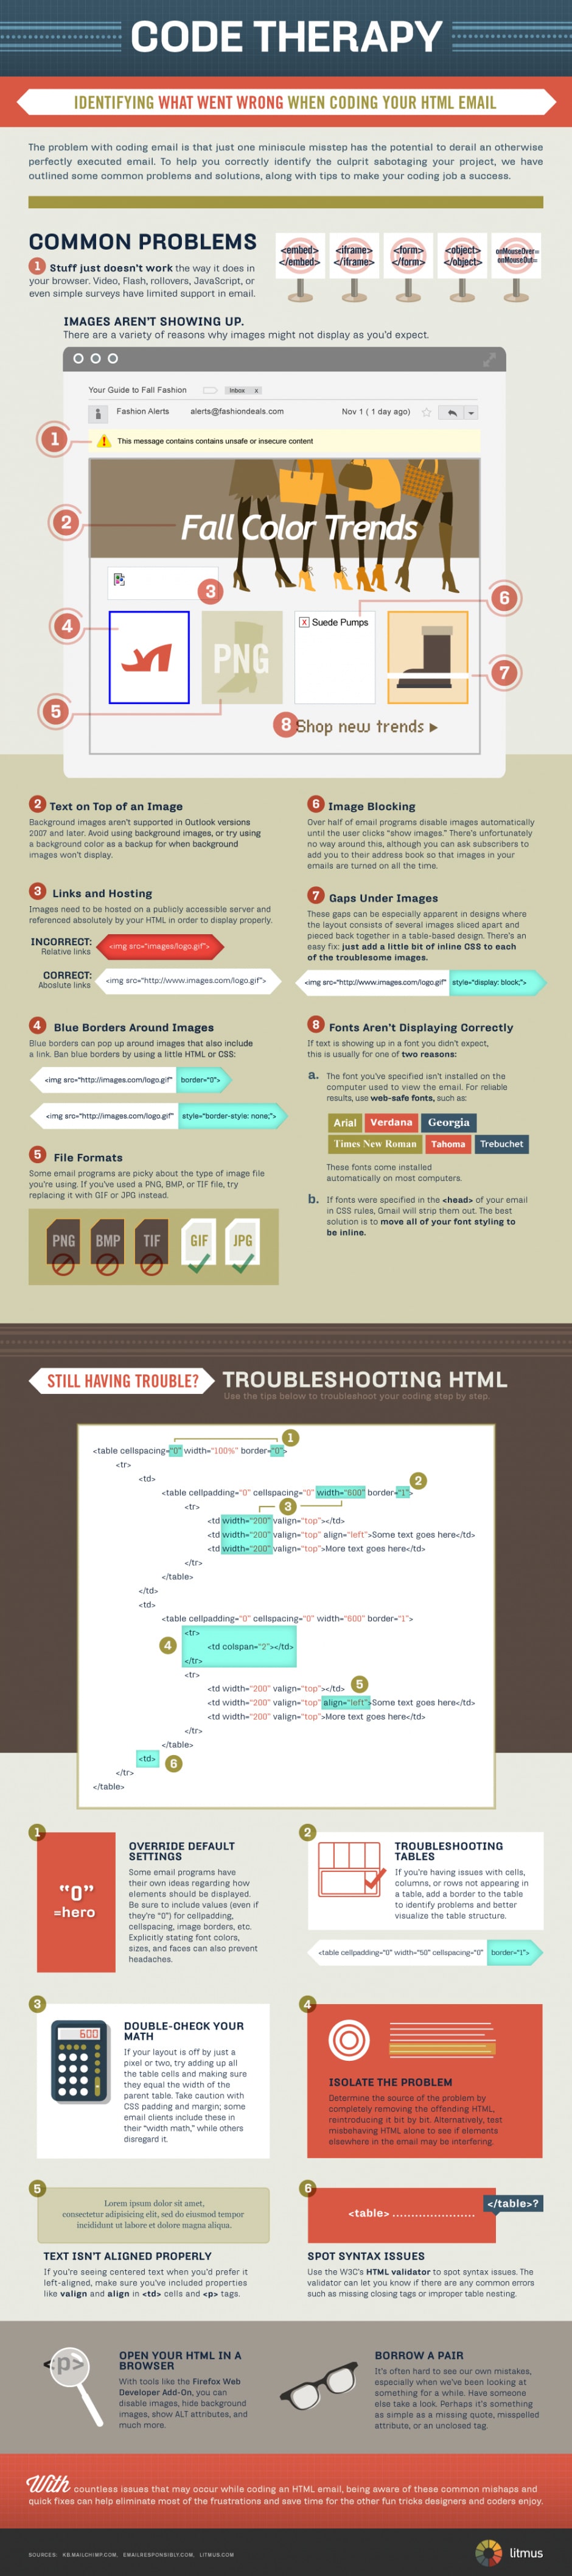 HTML-Bug-Fight-Email-Tips